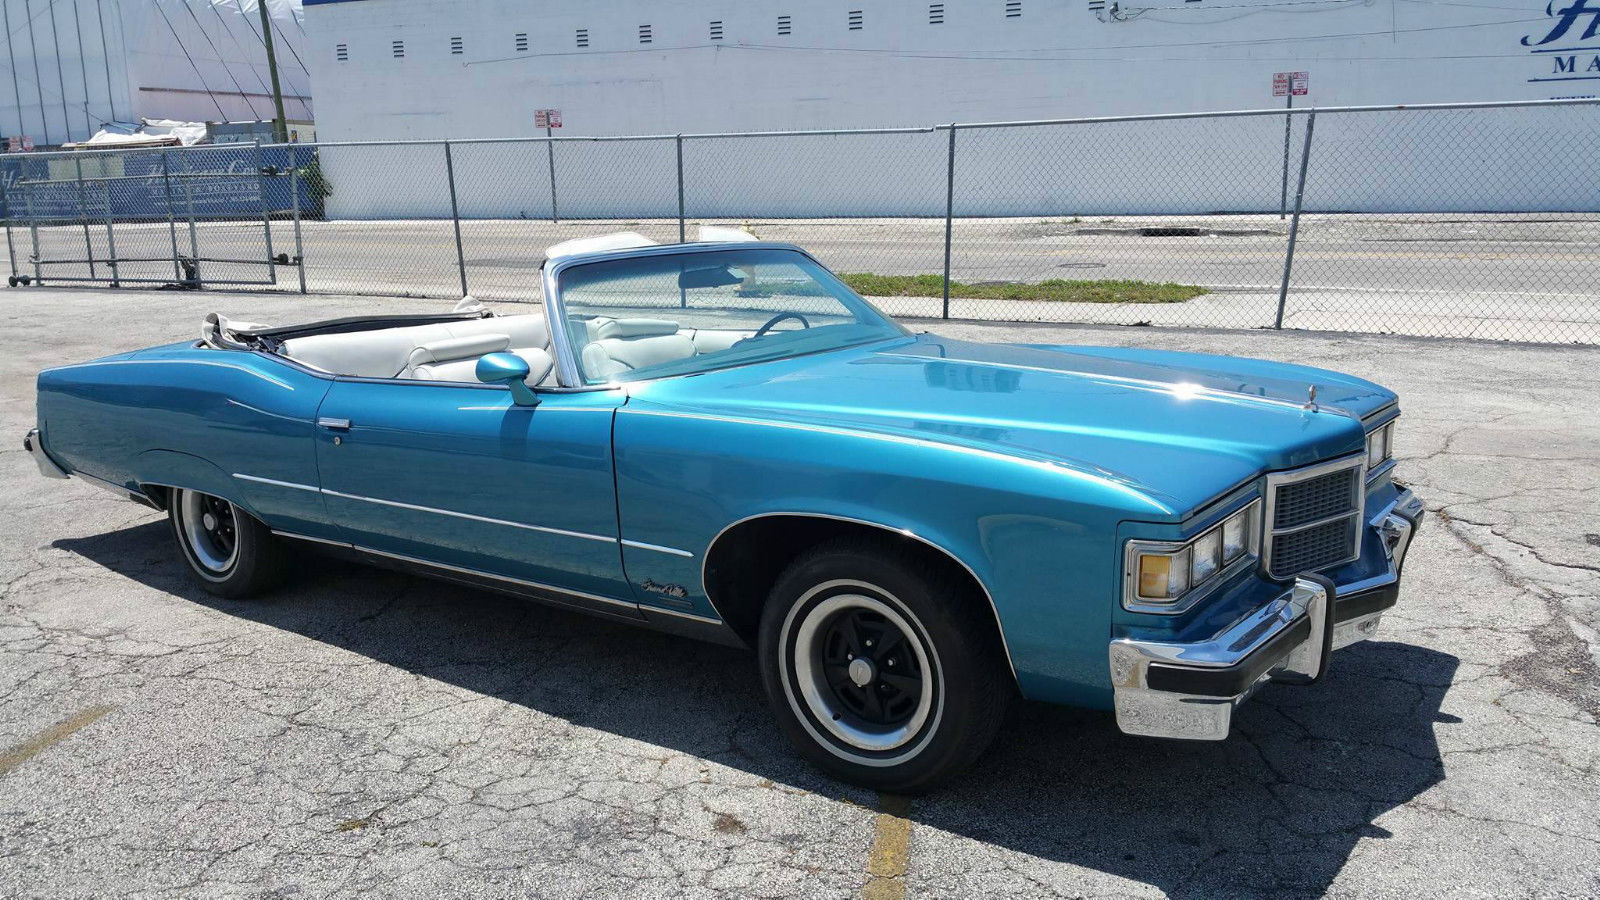 Cruising Through Fall In Style! This 1975 Pontiac Grand Ville Droptop Is The Perfect Way To Enjoy Autumn!